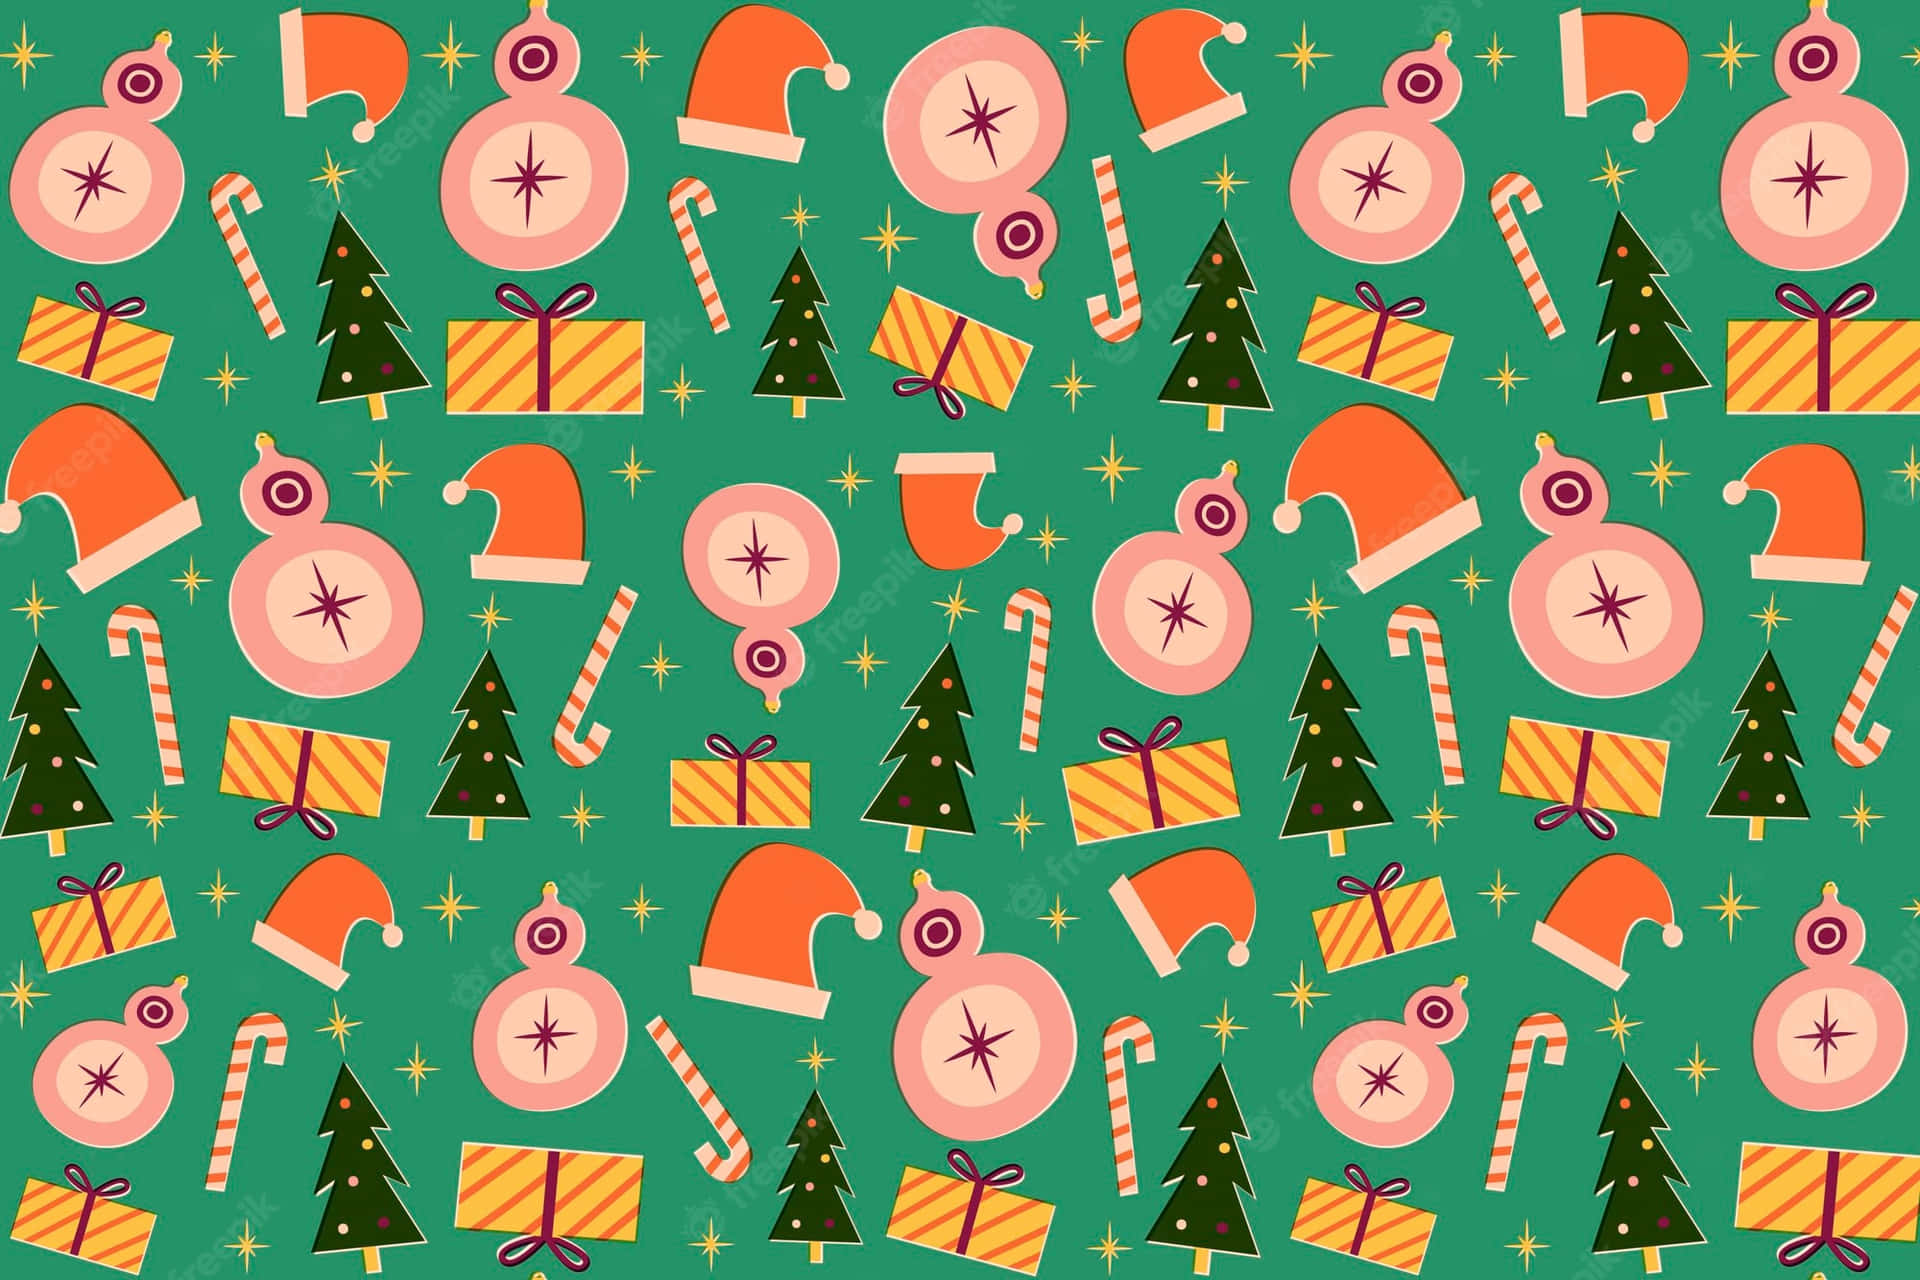 "Holiday cheer with this vintage Christmas!" Wallpaper